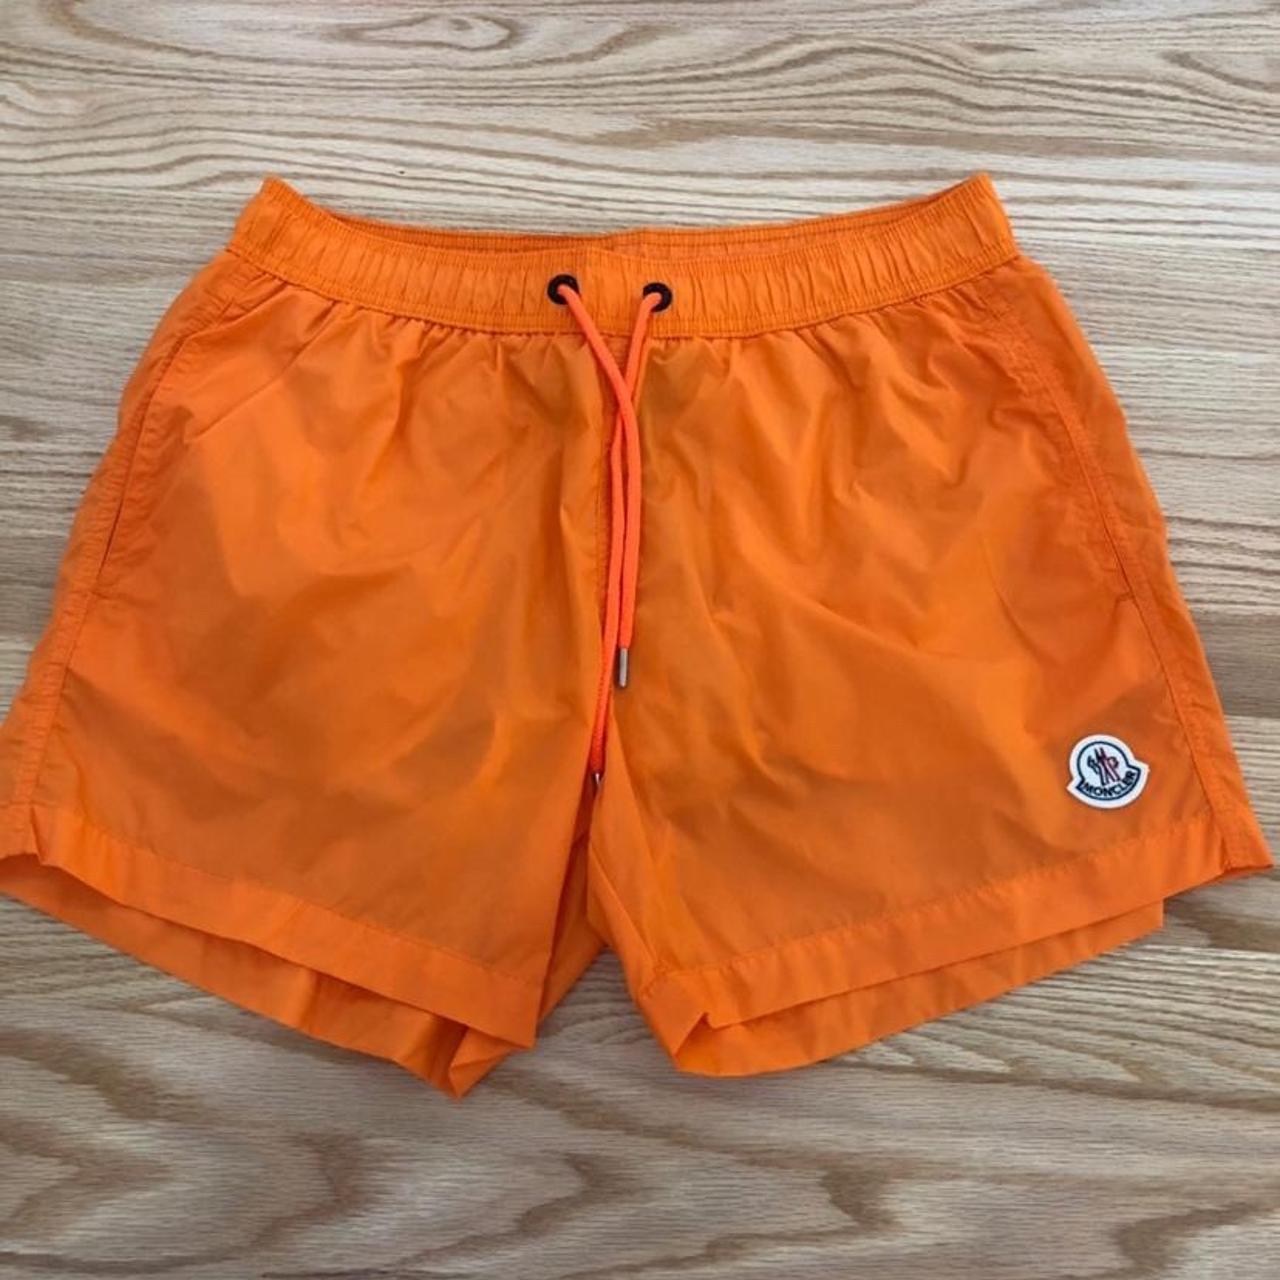 Moncler swim shorts 🔥 Size Large but small fitting... - Depop